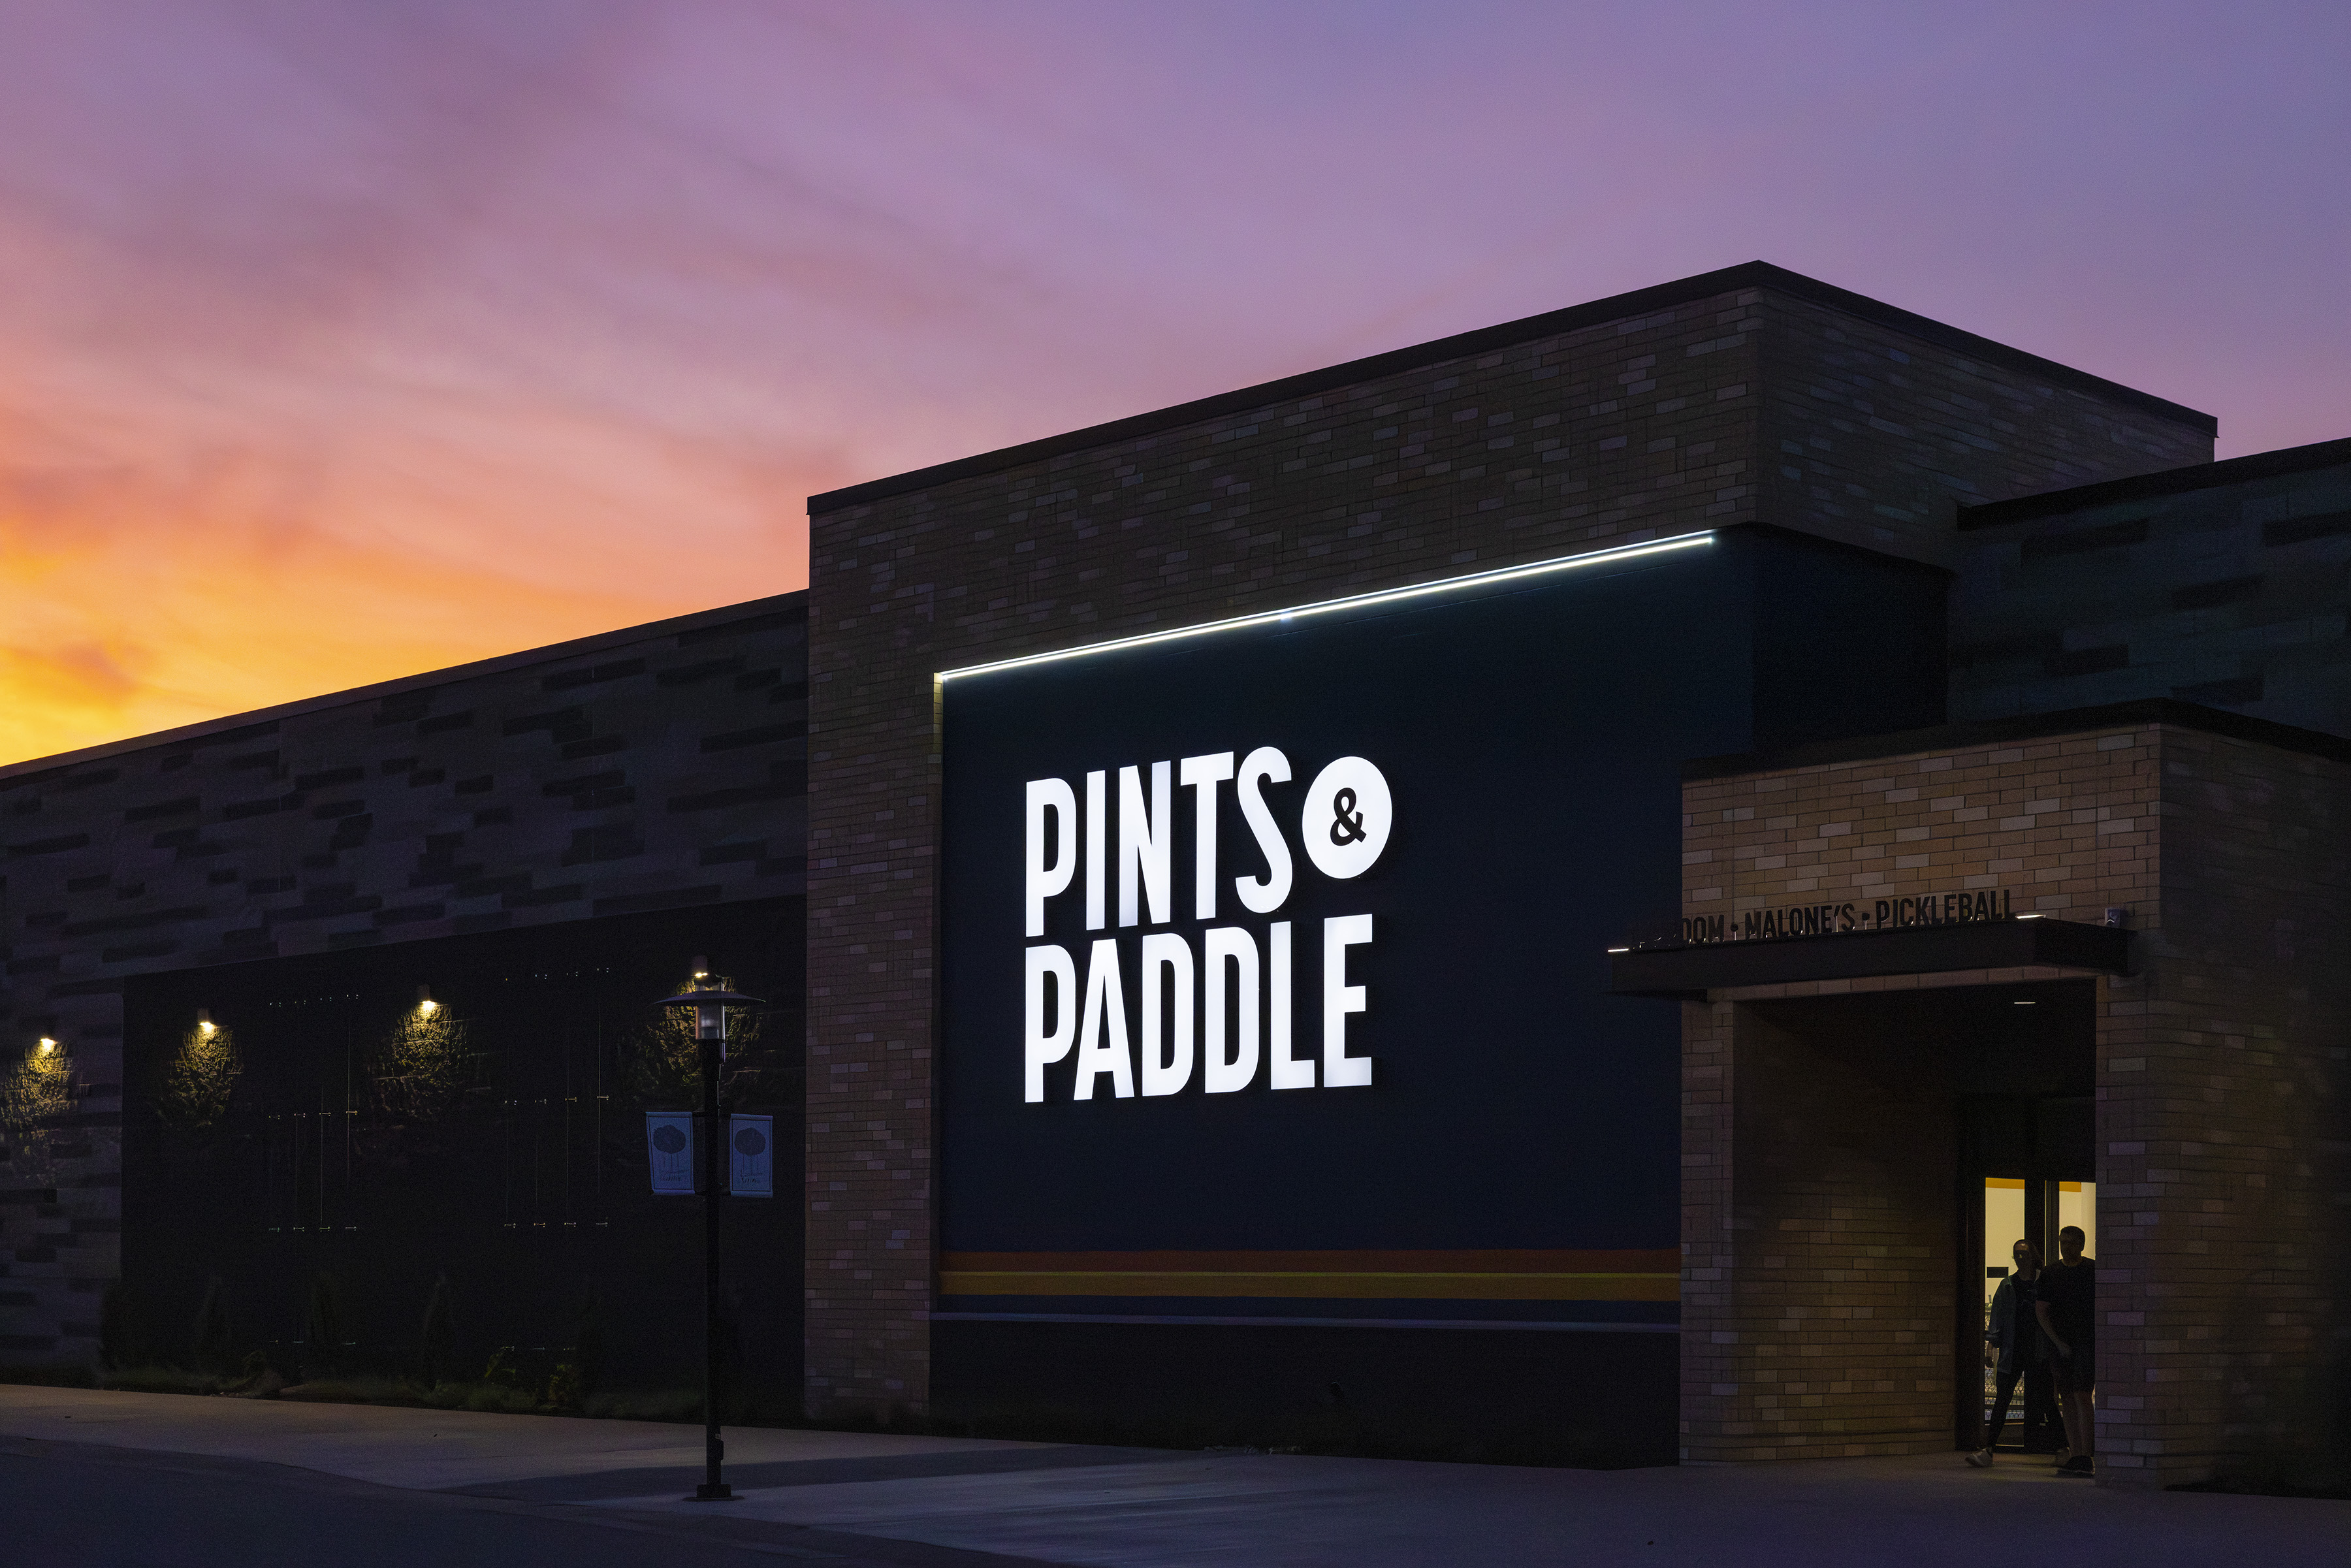 Pints &amp; Paddle is a family-owned, multifaceted entertainment venue located in Maple Grove, MN offering 10 indoor pickleball courts and a vibrant sports bar with more than 70 taps, live music and gourmet food.